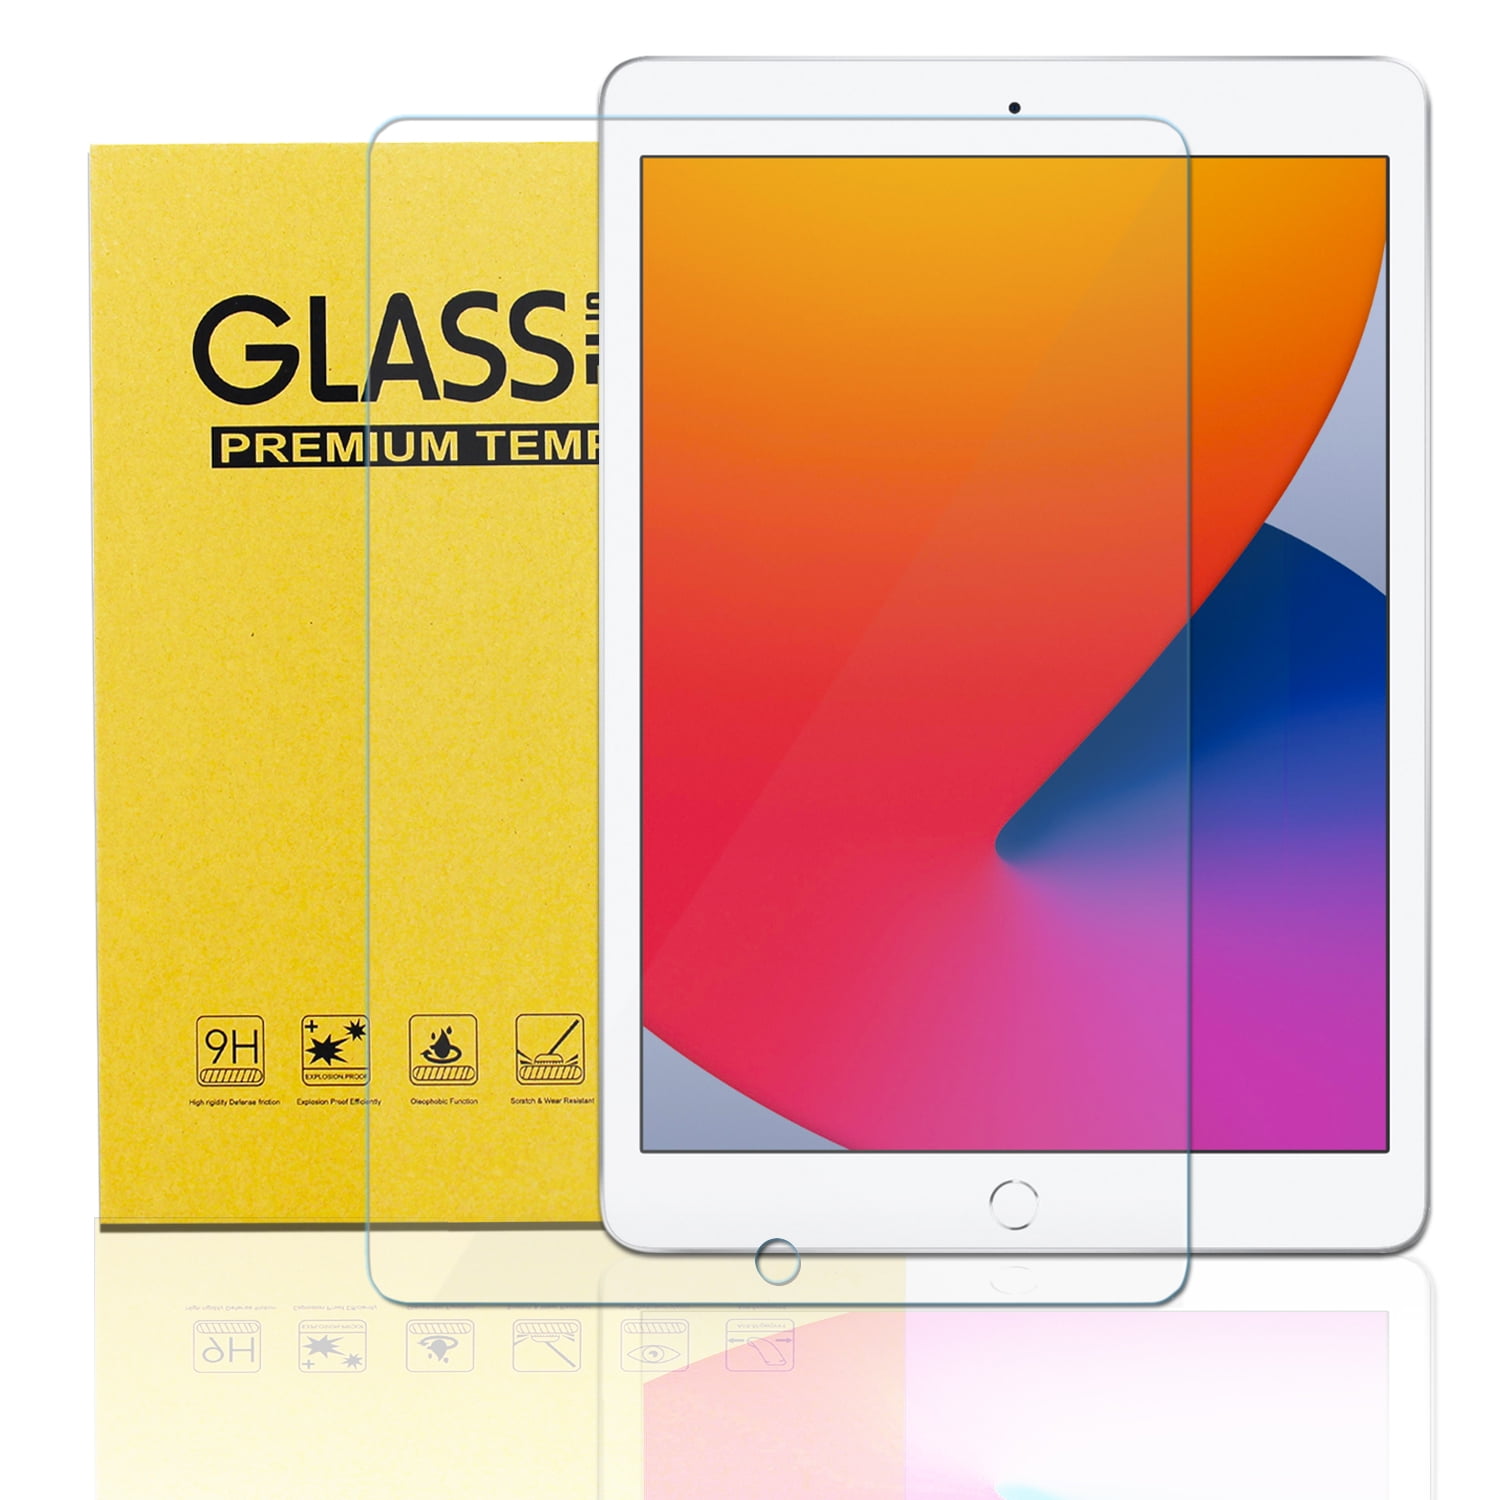 avakot 2 Pack Screen Protector for iPad 10.2 | Tempered Glass Film  Compatible with iPad 9th Generation 10.2 Inch 2021/2020 | Anti- Scratch  Sensitive